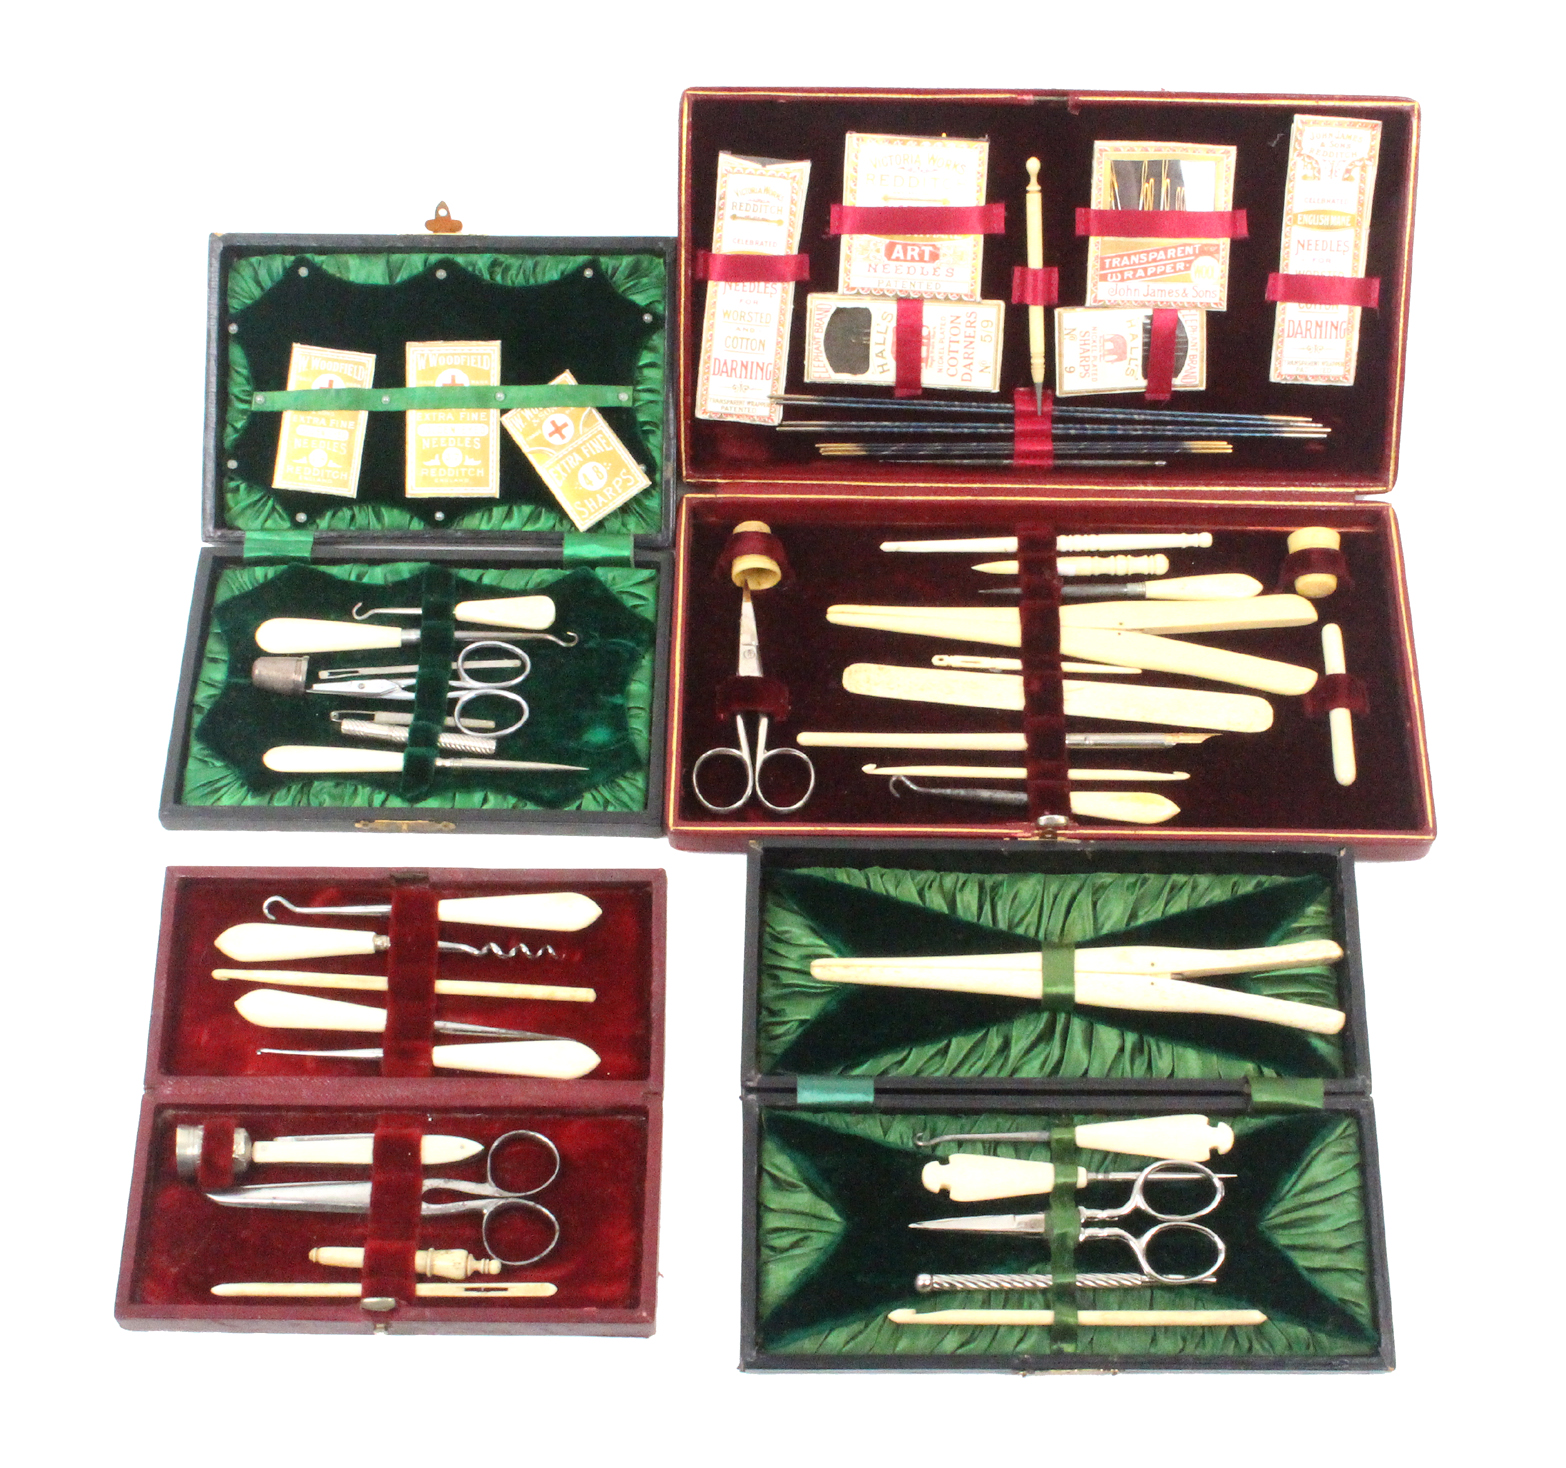 Four late 19th Century small format sewing companions all of rectangular form in leather or